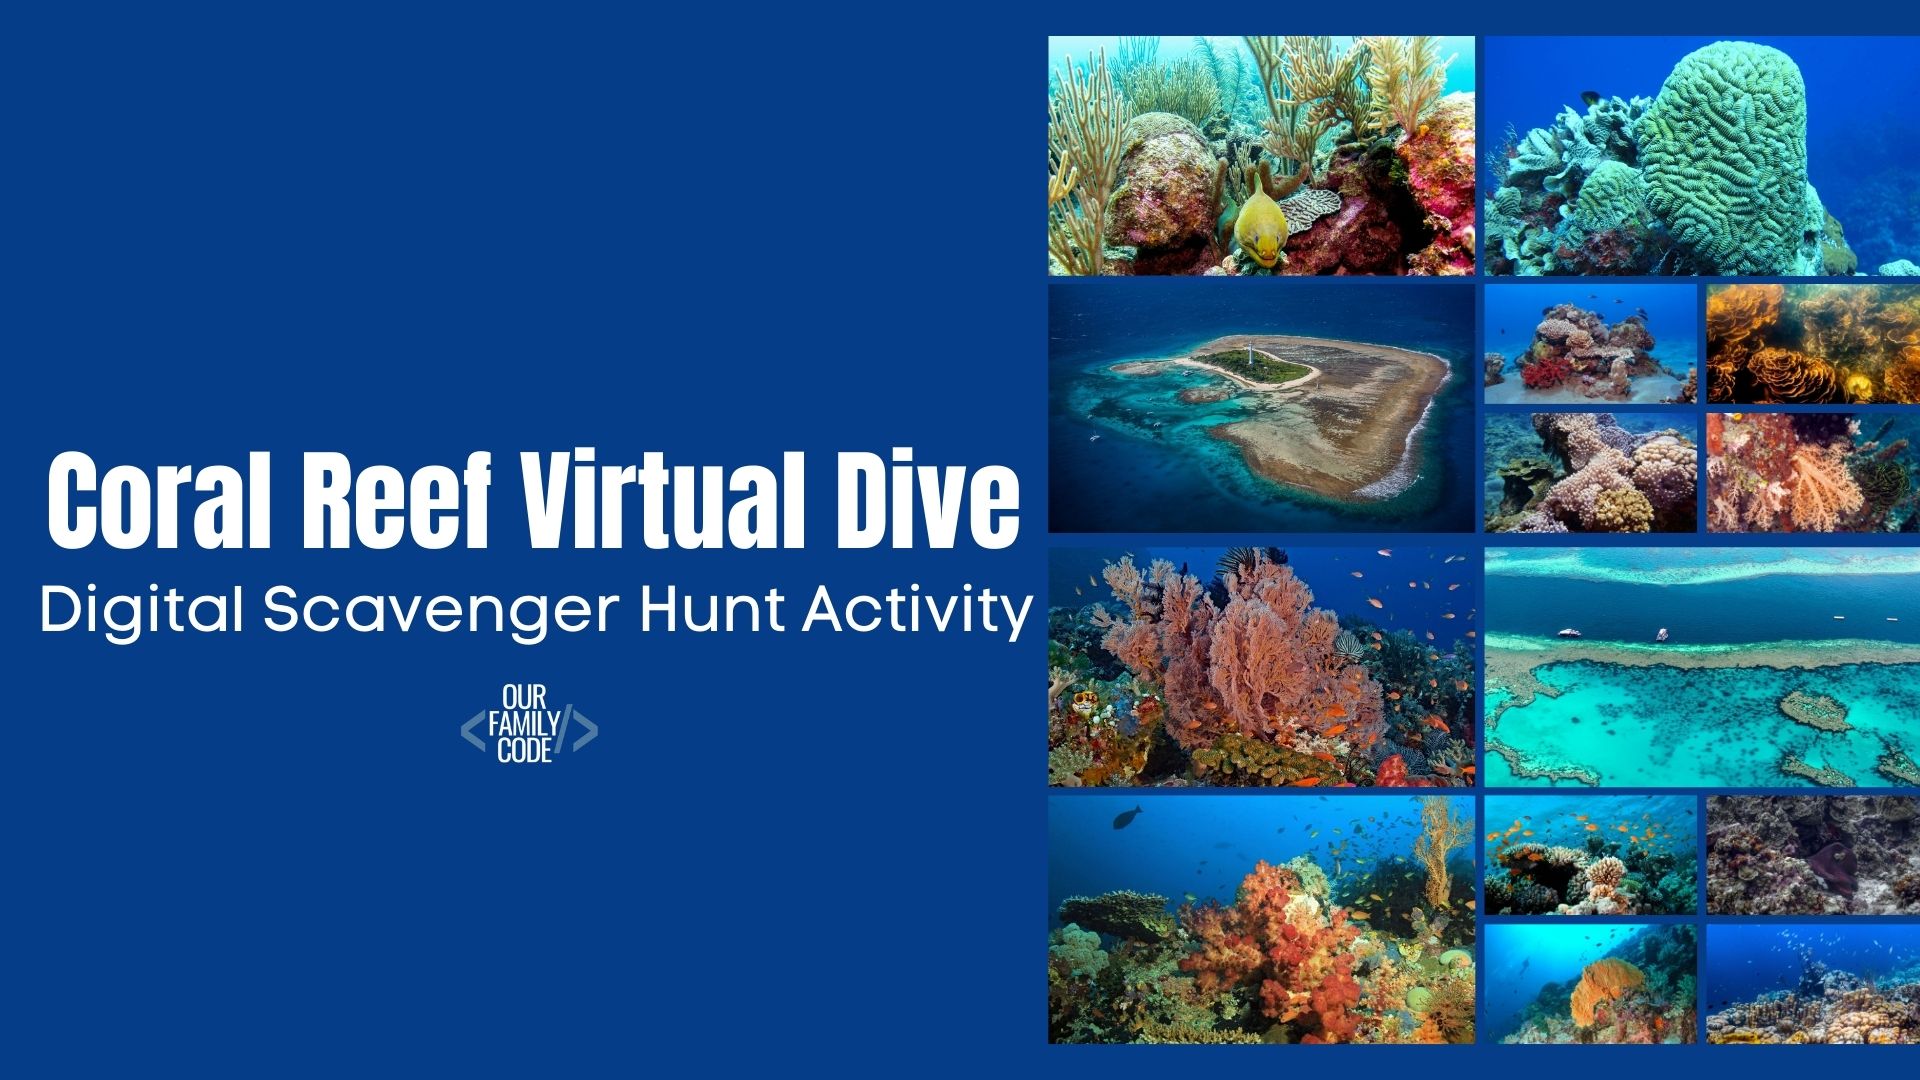 A picture of 14 coral reefs and "Coral Reef Virtual Dive" in white text.